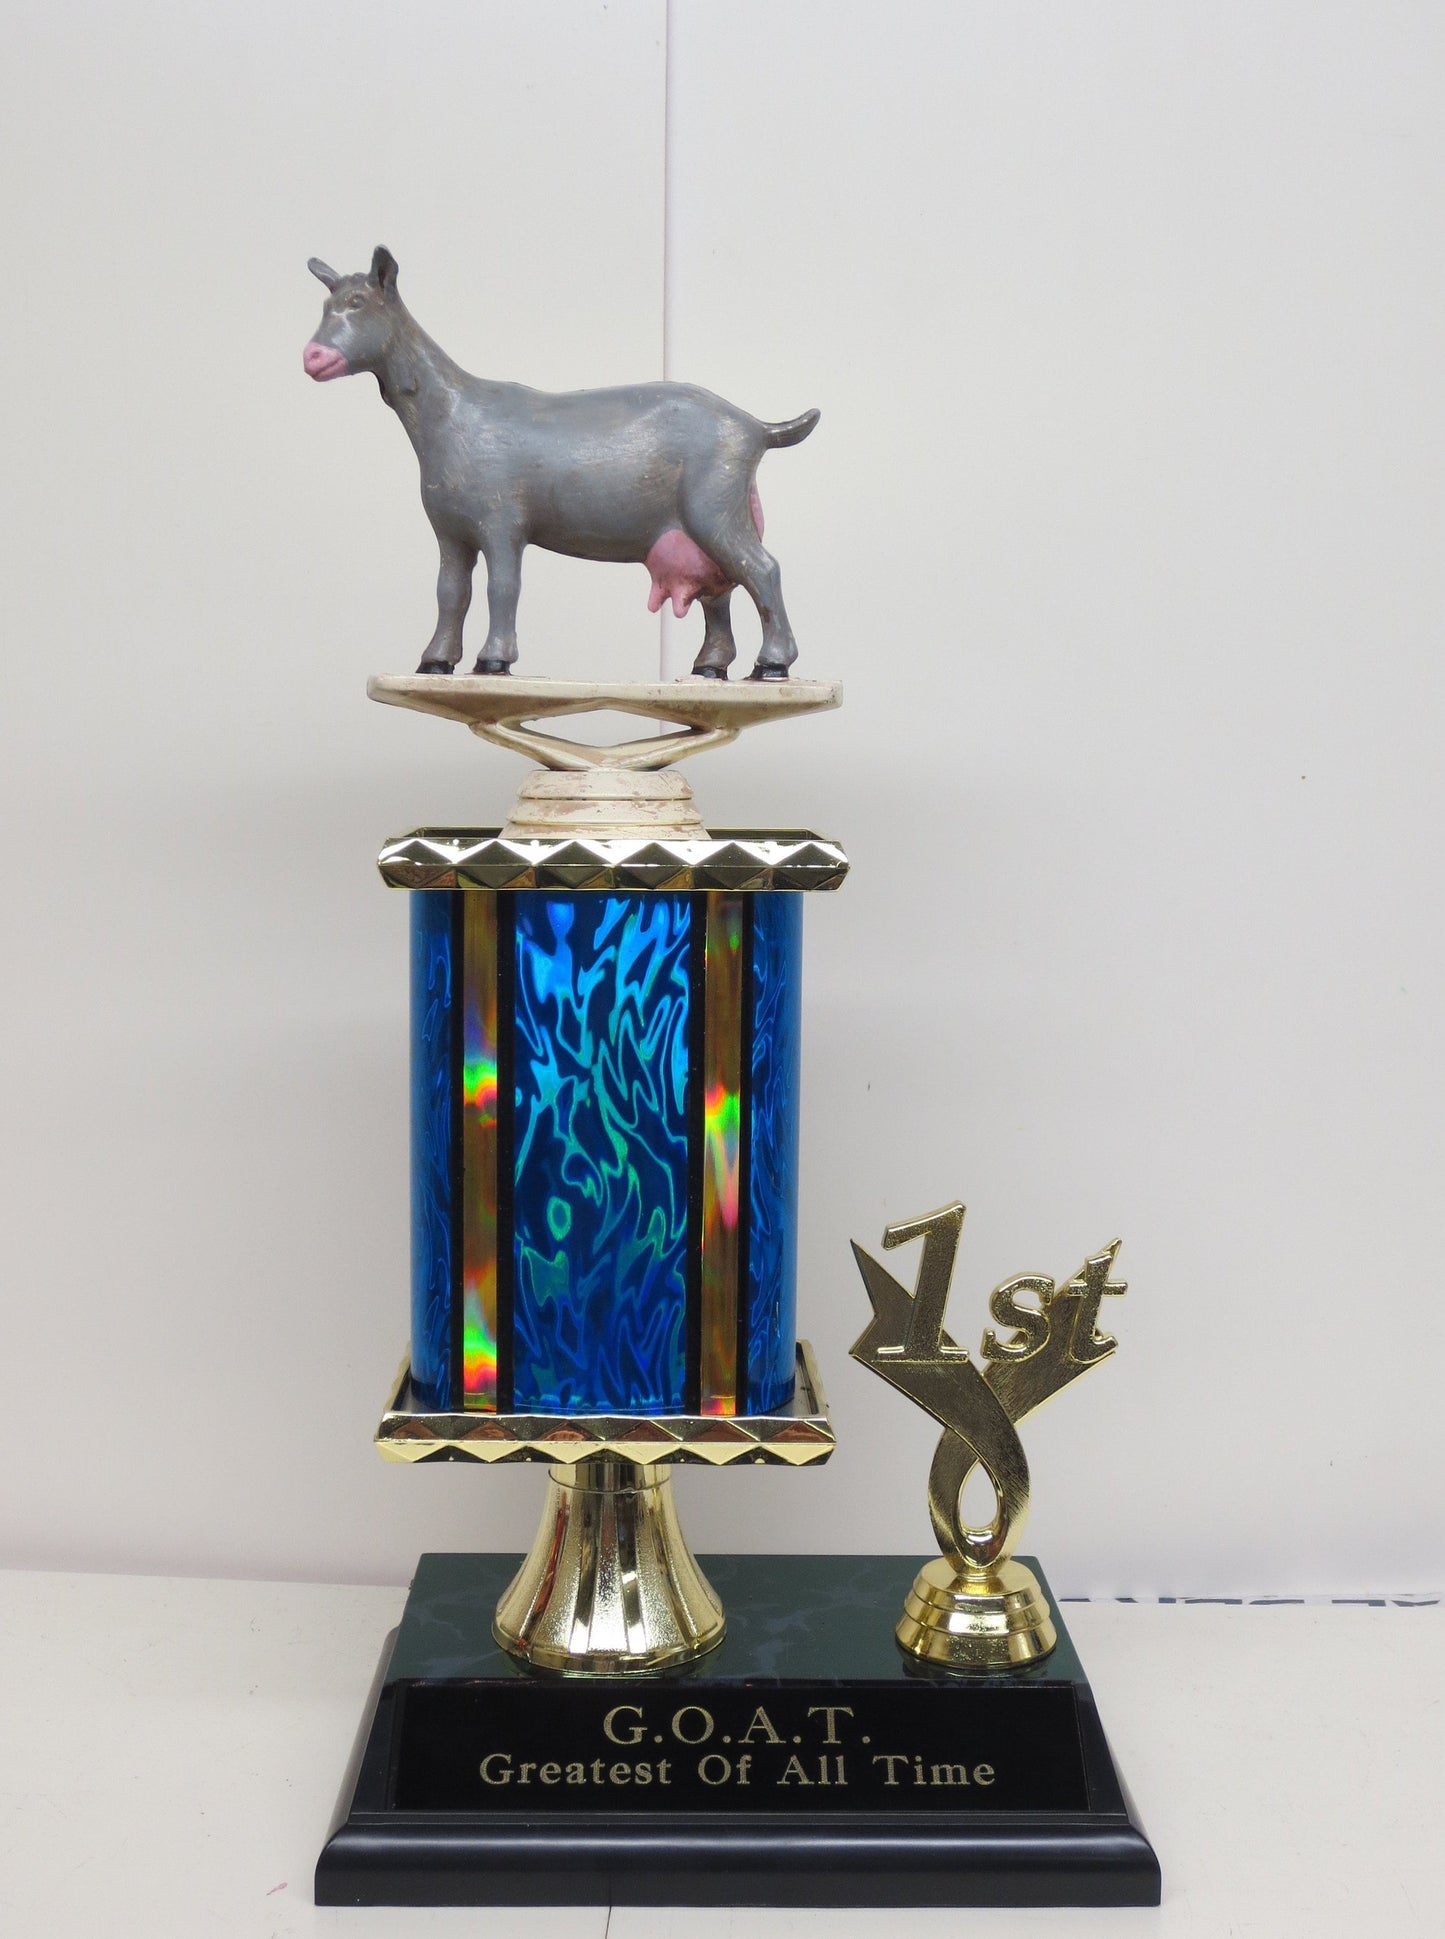 Funny Trophy GOAT Trophy Greatest of All Time Award Trophy Hand Painted Top Sales Motivational Achievement Award Personalized Winner